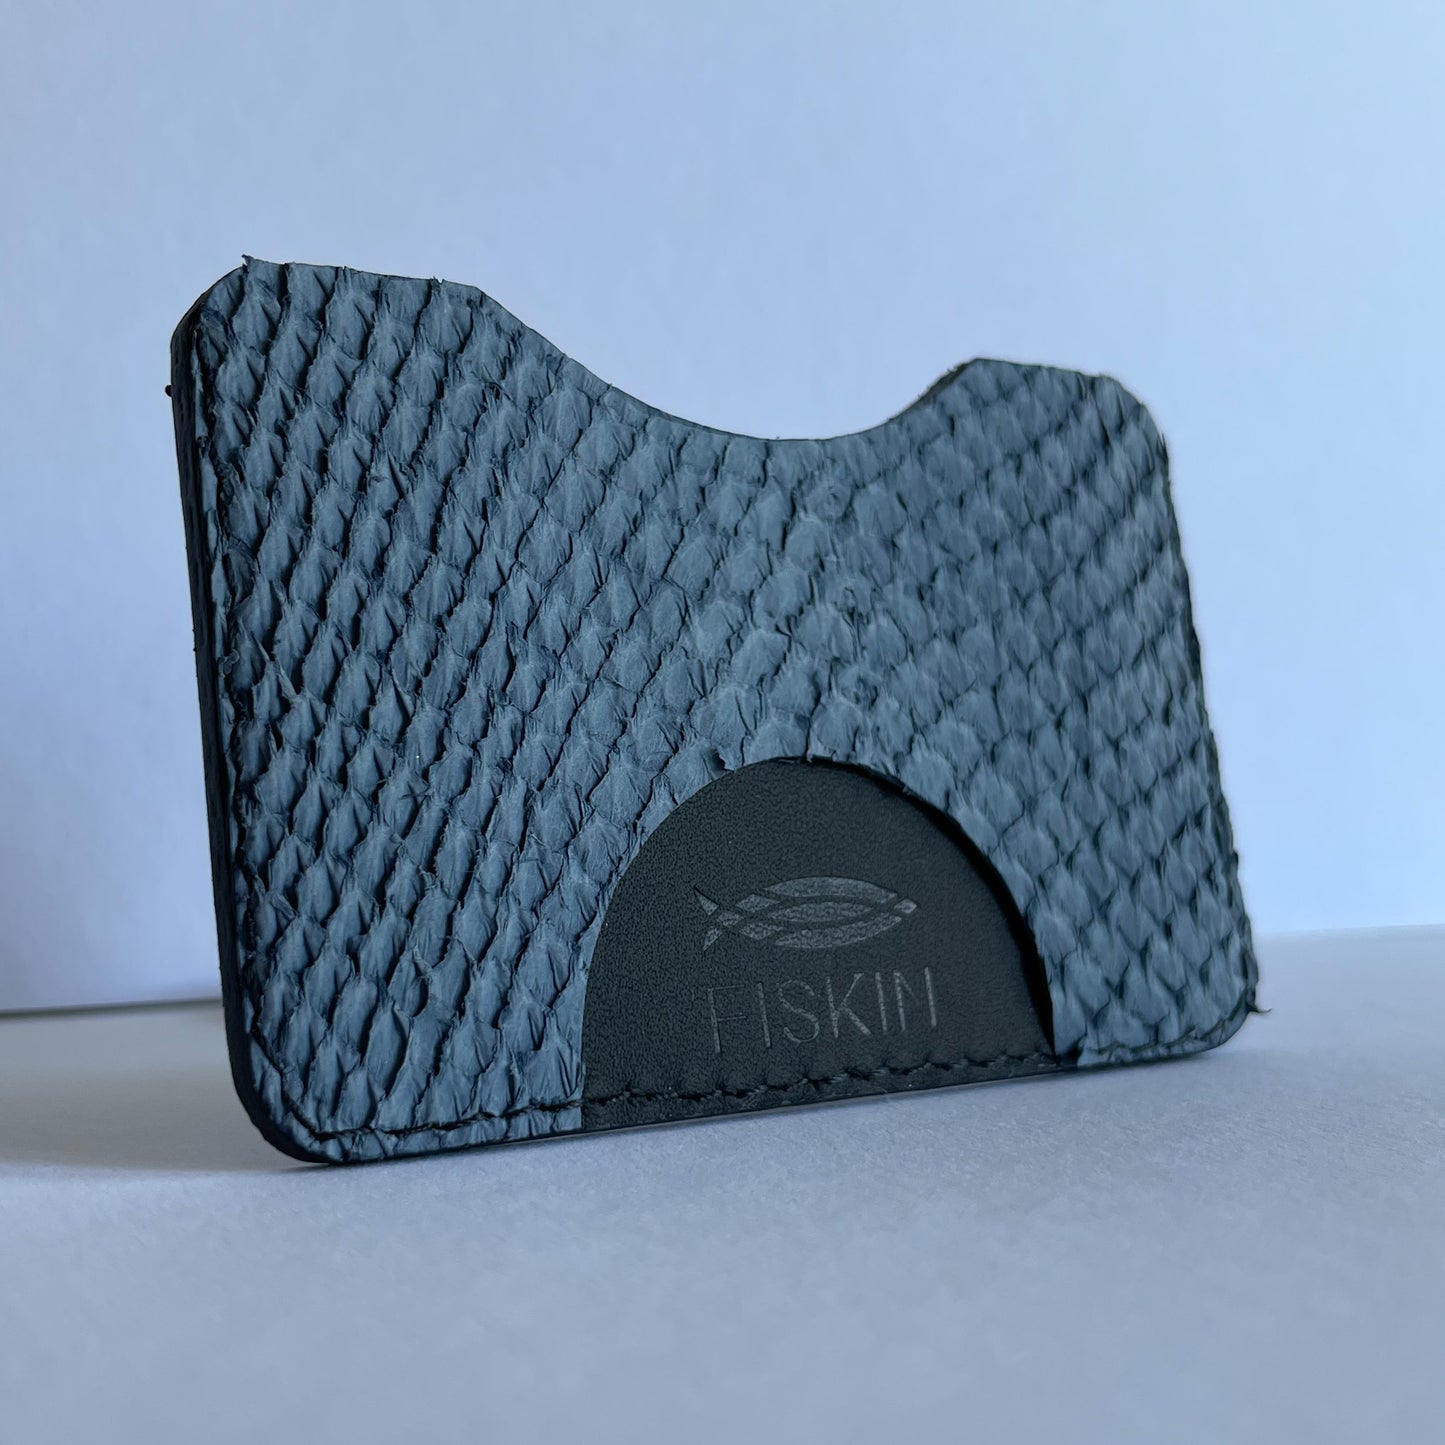 Fish leather cardholder, mystery from the deep sea